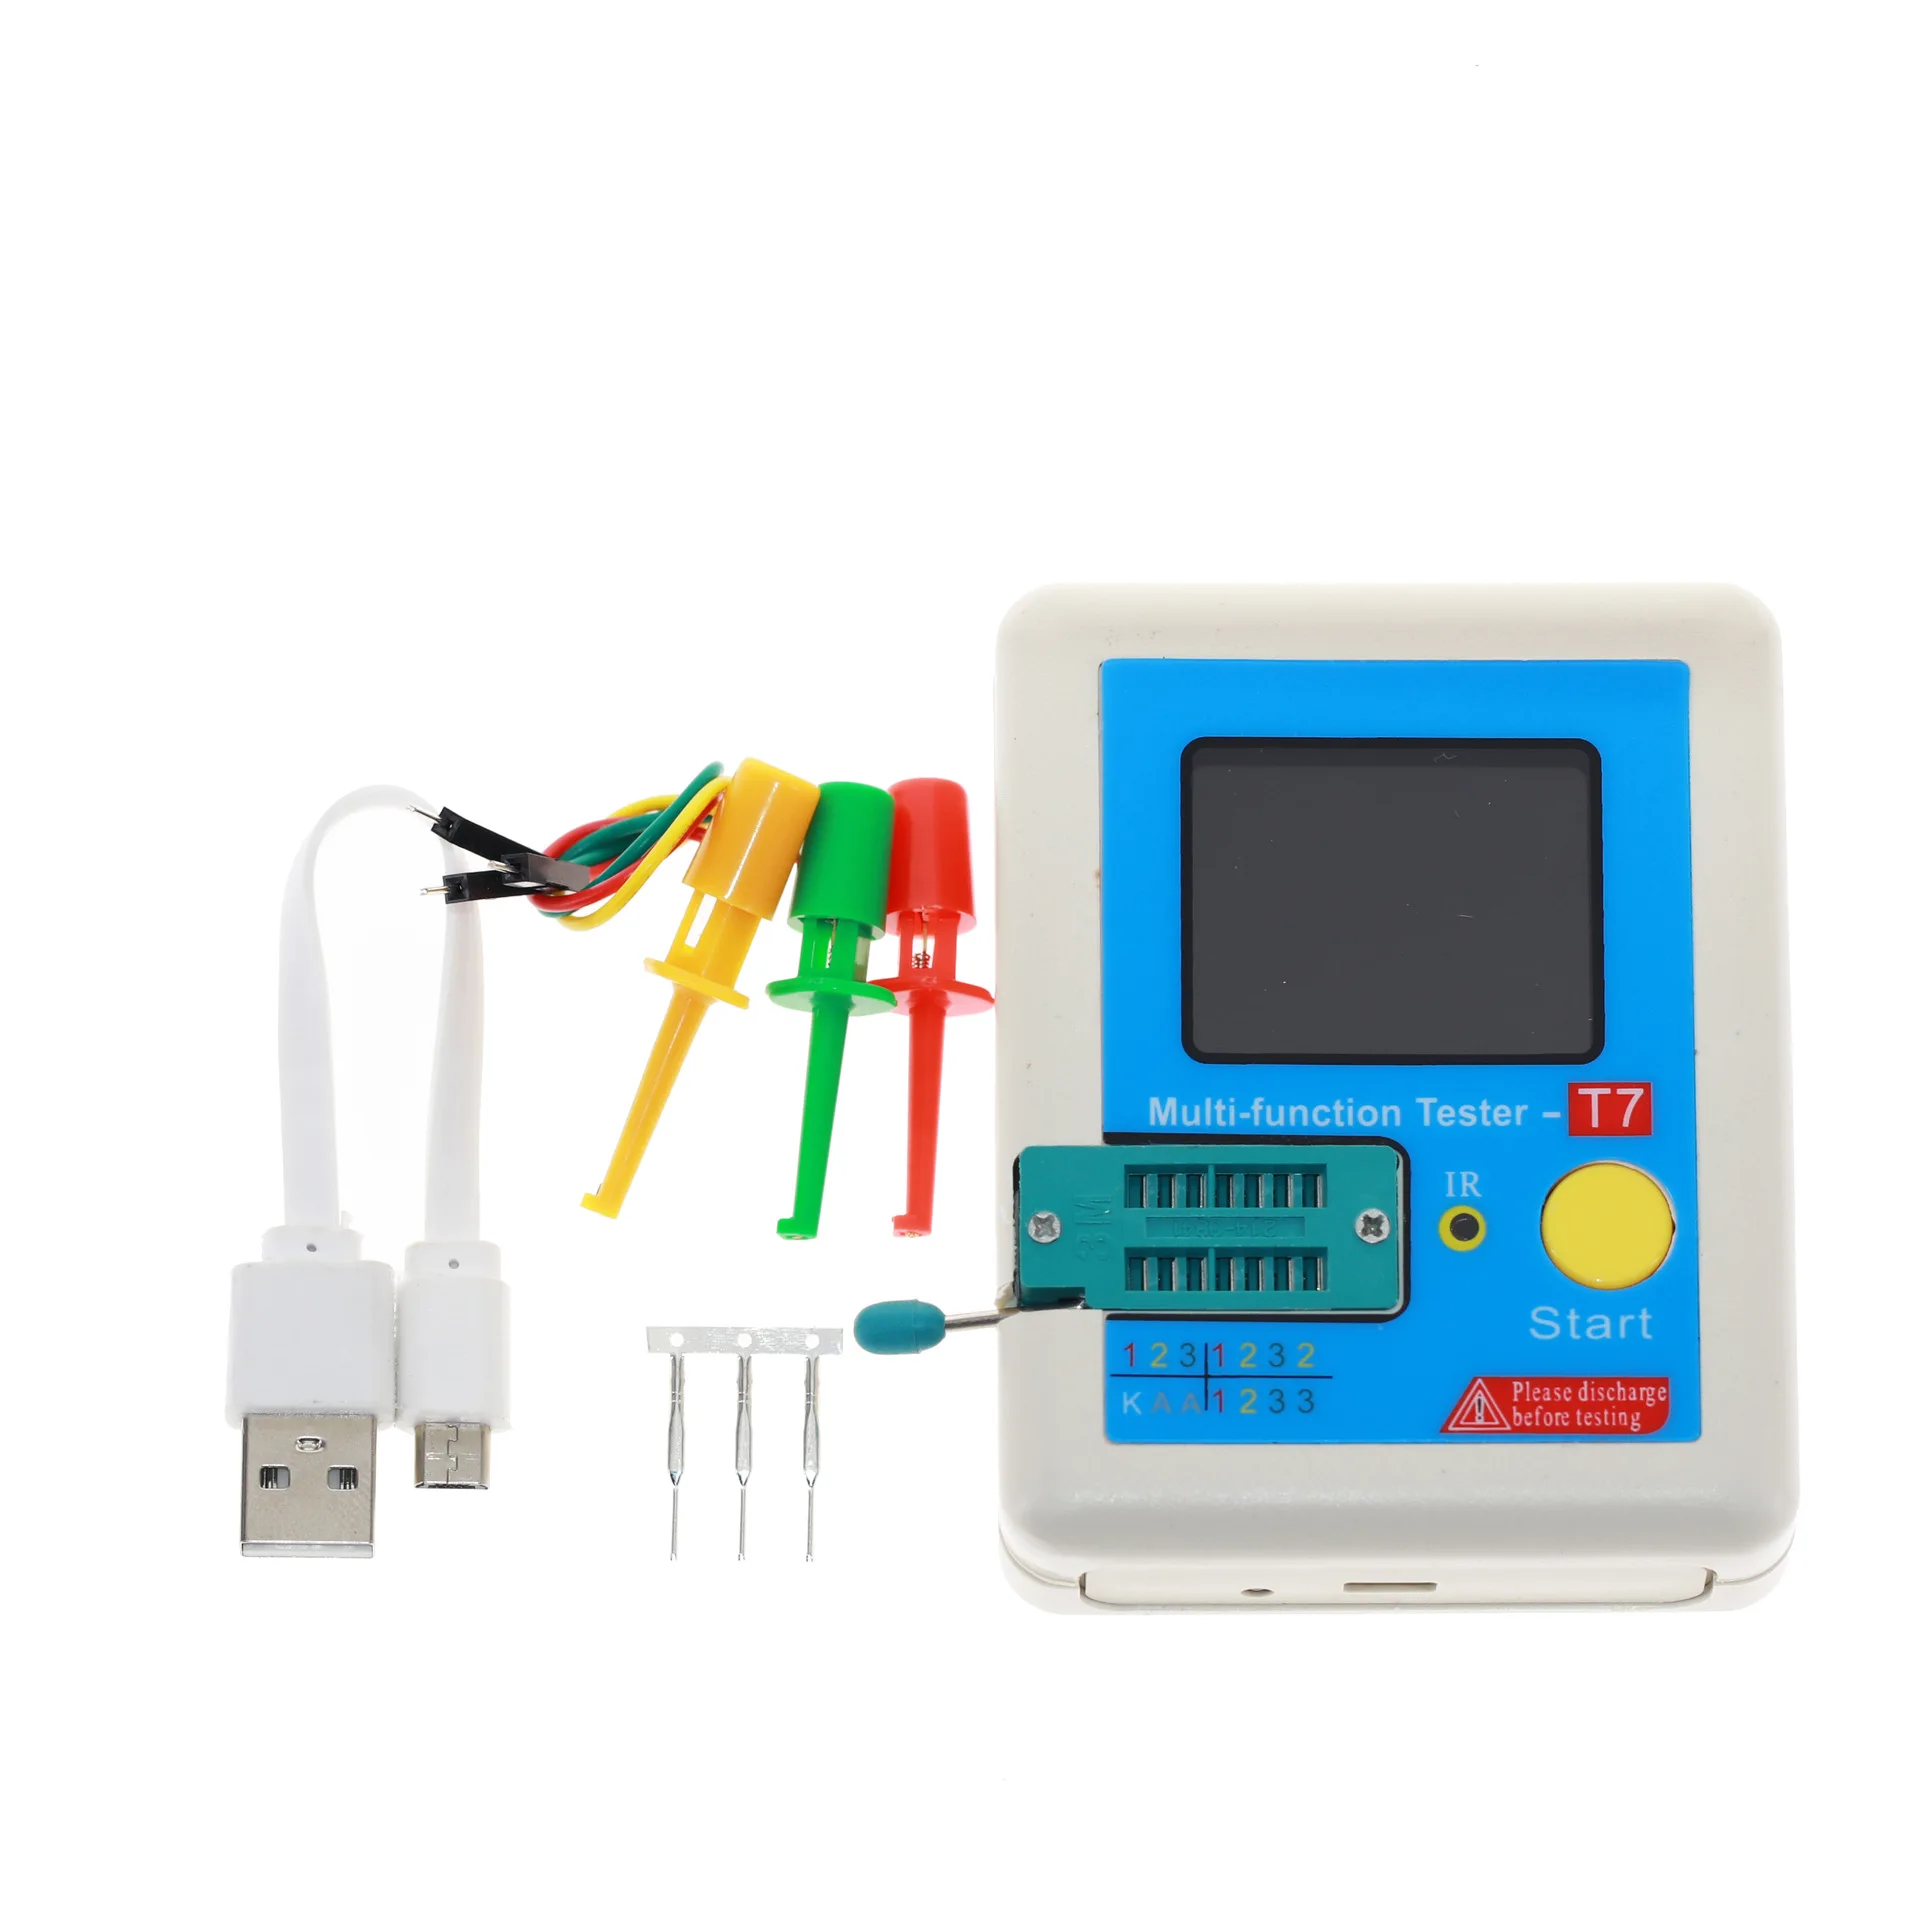 

High-Speed Transistor Tester LCR-T7 Full-Color Screen Graphic Display Finished ESR Meter Multifunctional Test